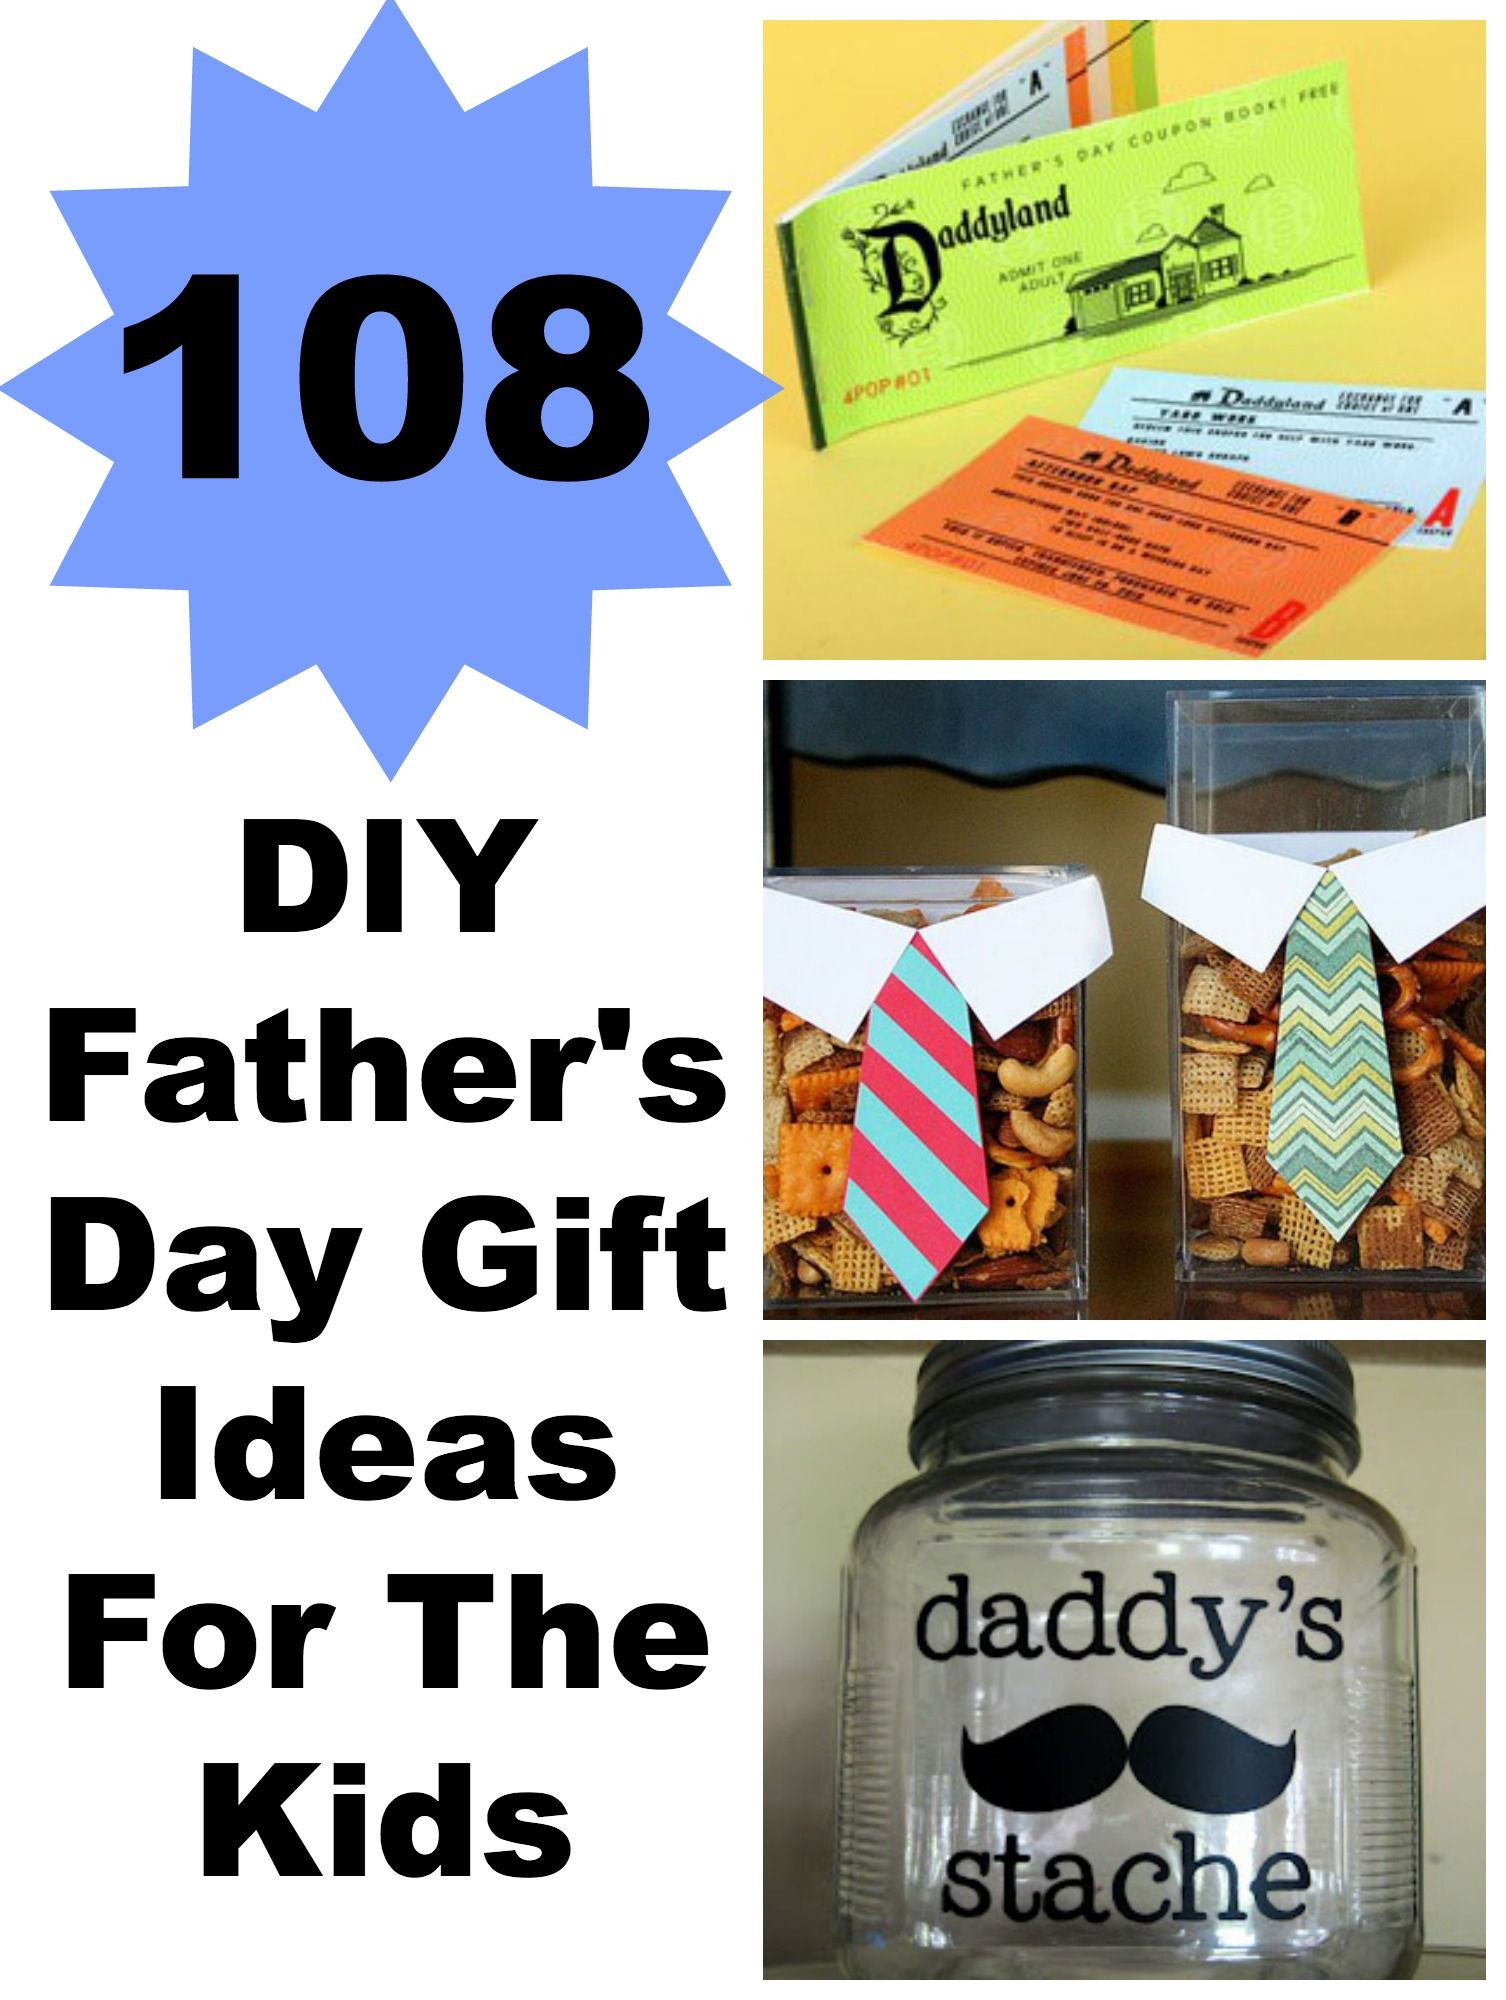 Cool Fathers Day Gift Ideas
 108 DIY Father s Day Gift Ideas For The Kids